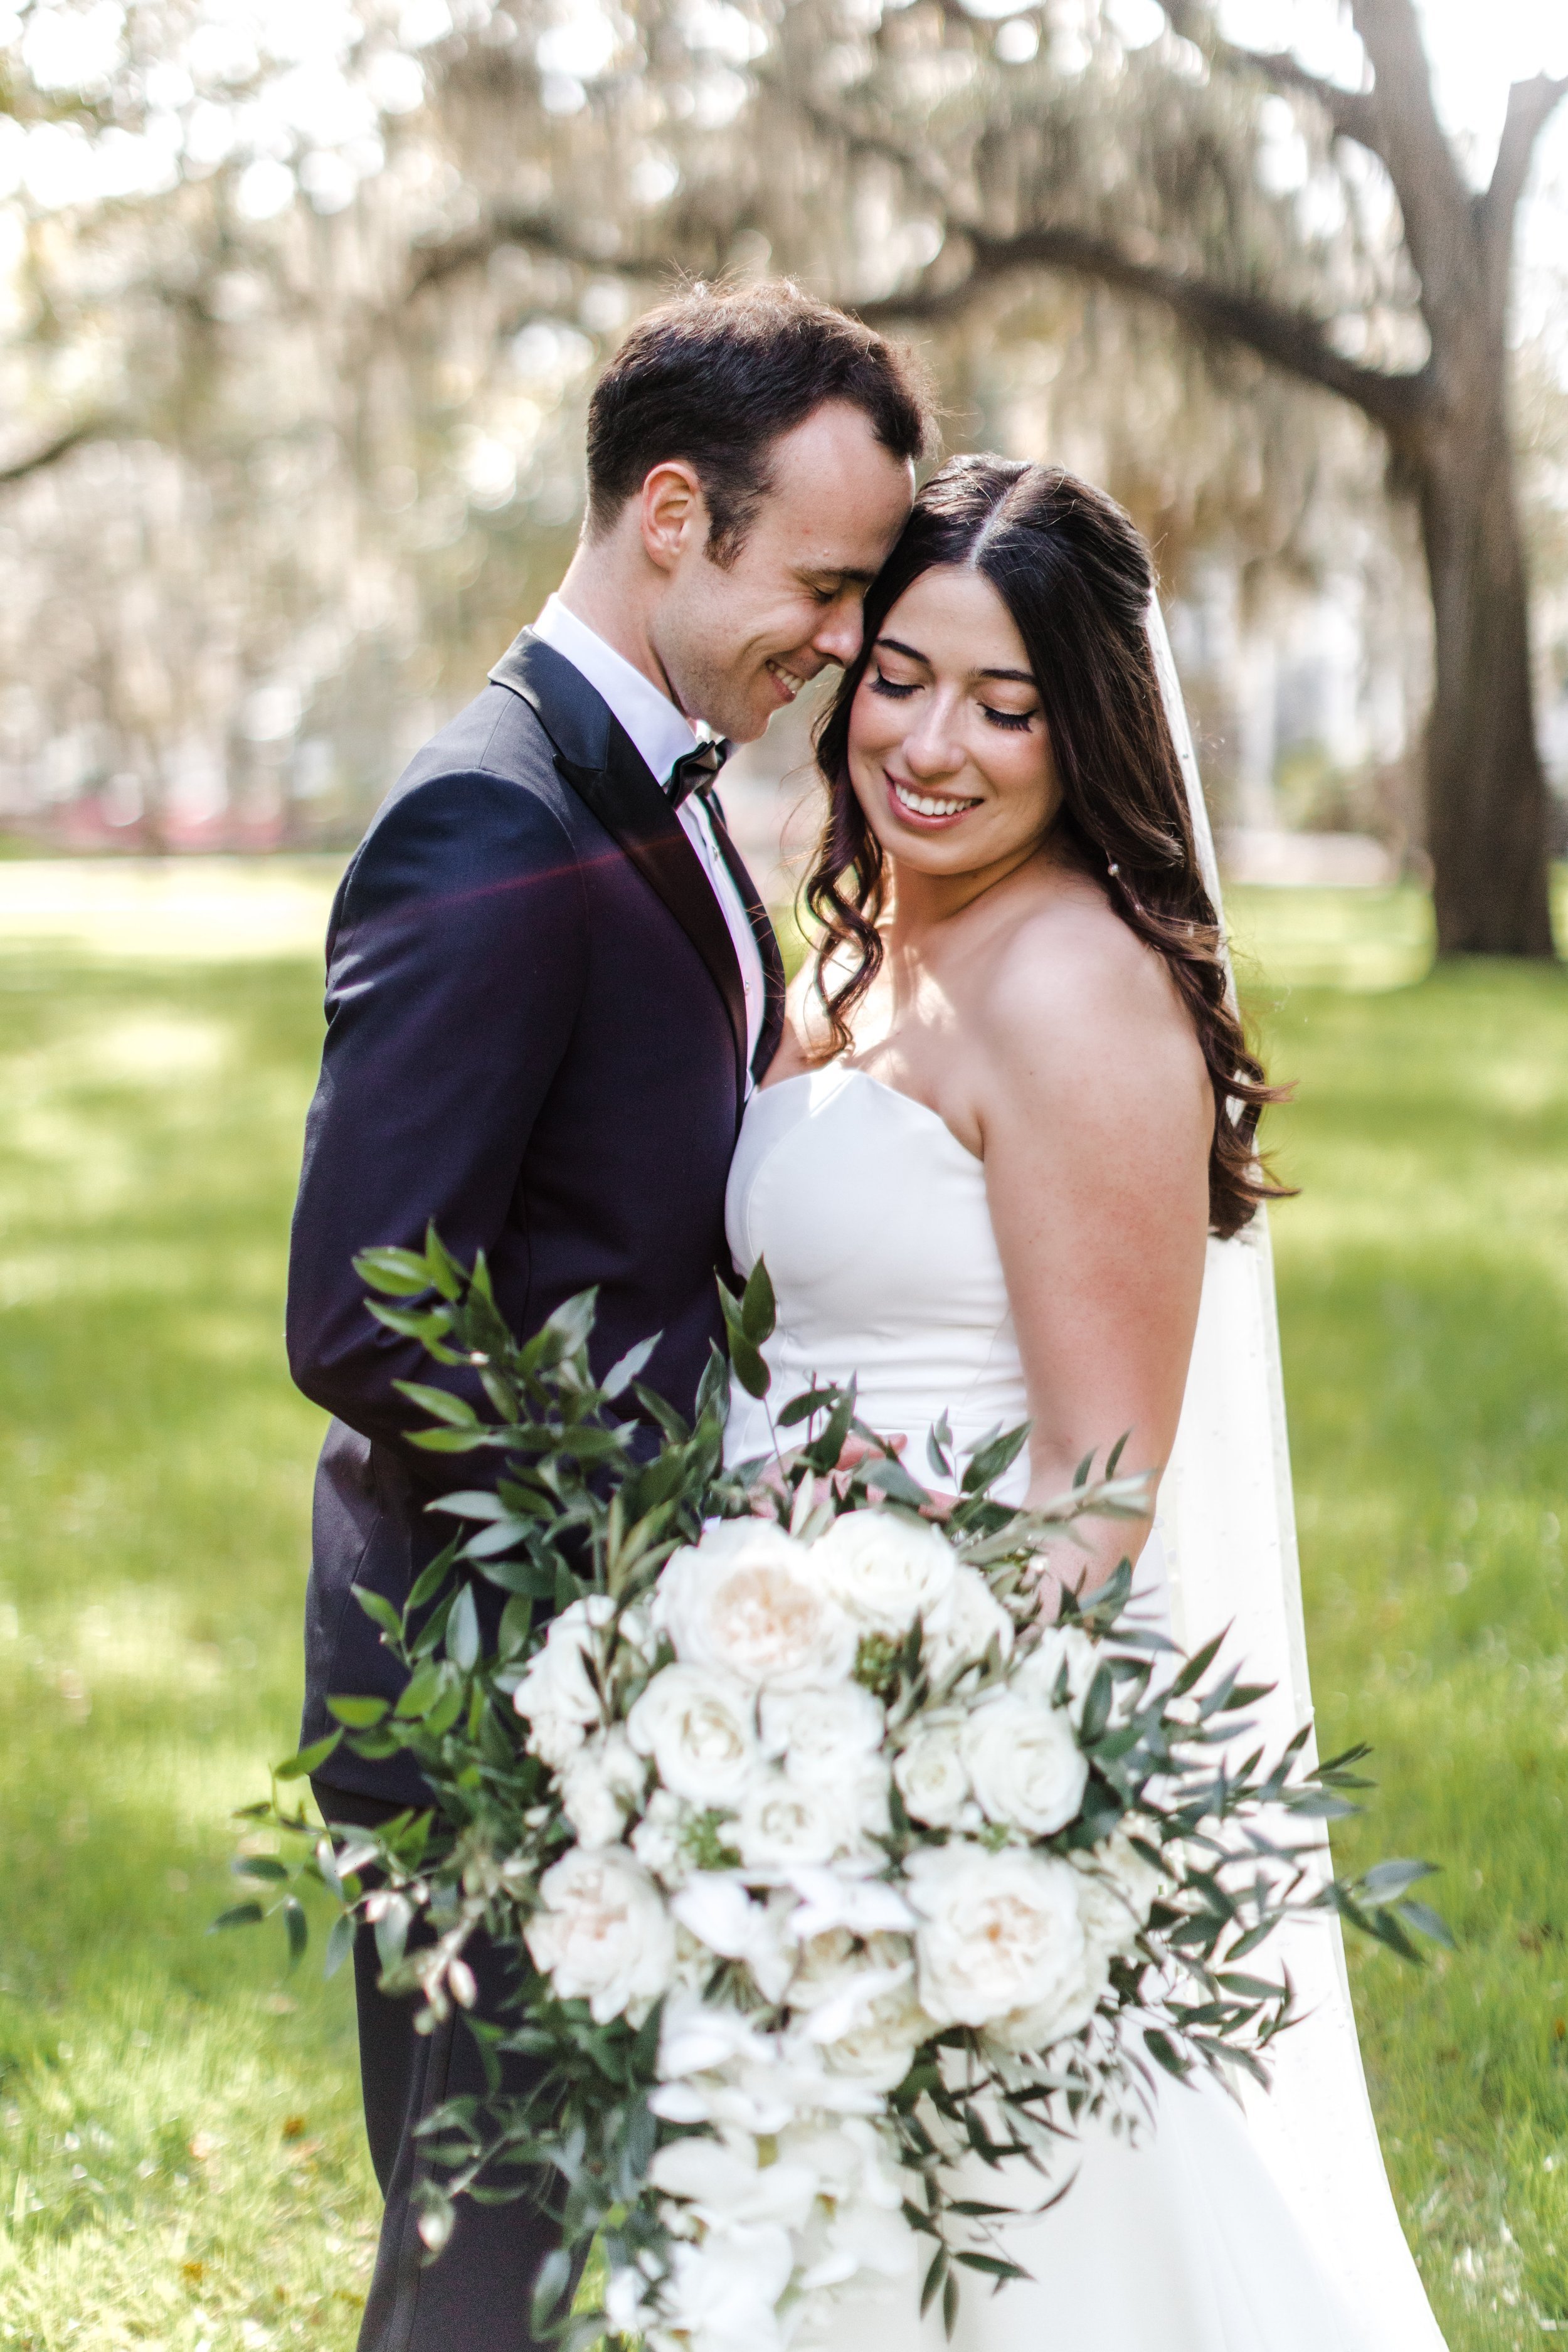 ivory-and-beau-wedding-and-florals-annelise-and-preston-wedding-blog-savannah-wedding-savannah-wedding-coordinator-savannah-florsit-wedding-florist-southern-wedding-forsyth-park-fountain-soho-south-savannah-wedding-gmp20199345221-13.jpg